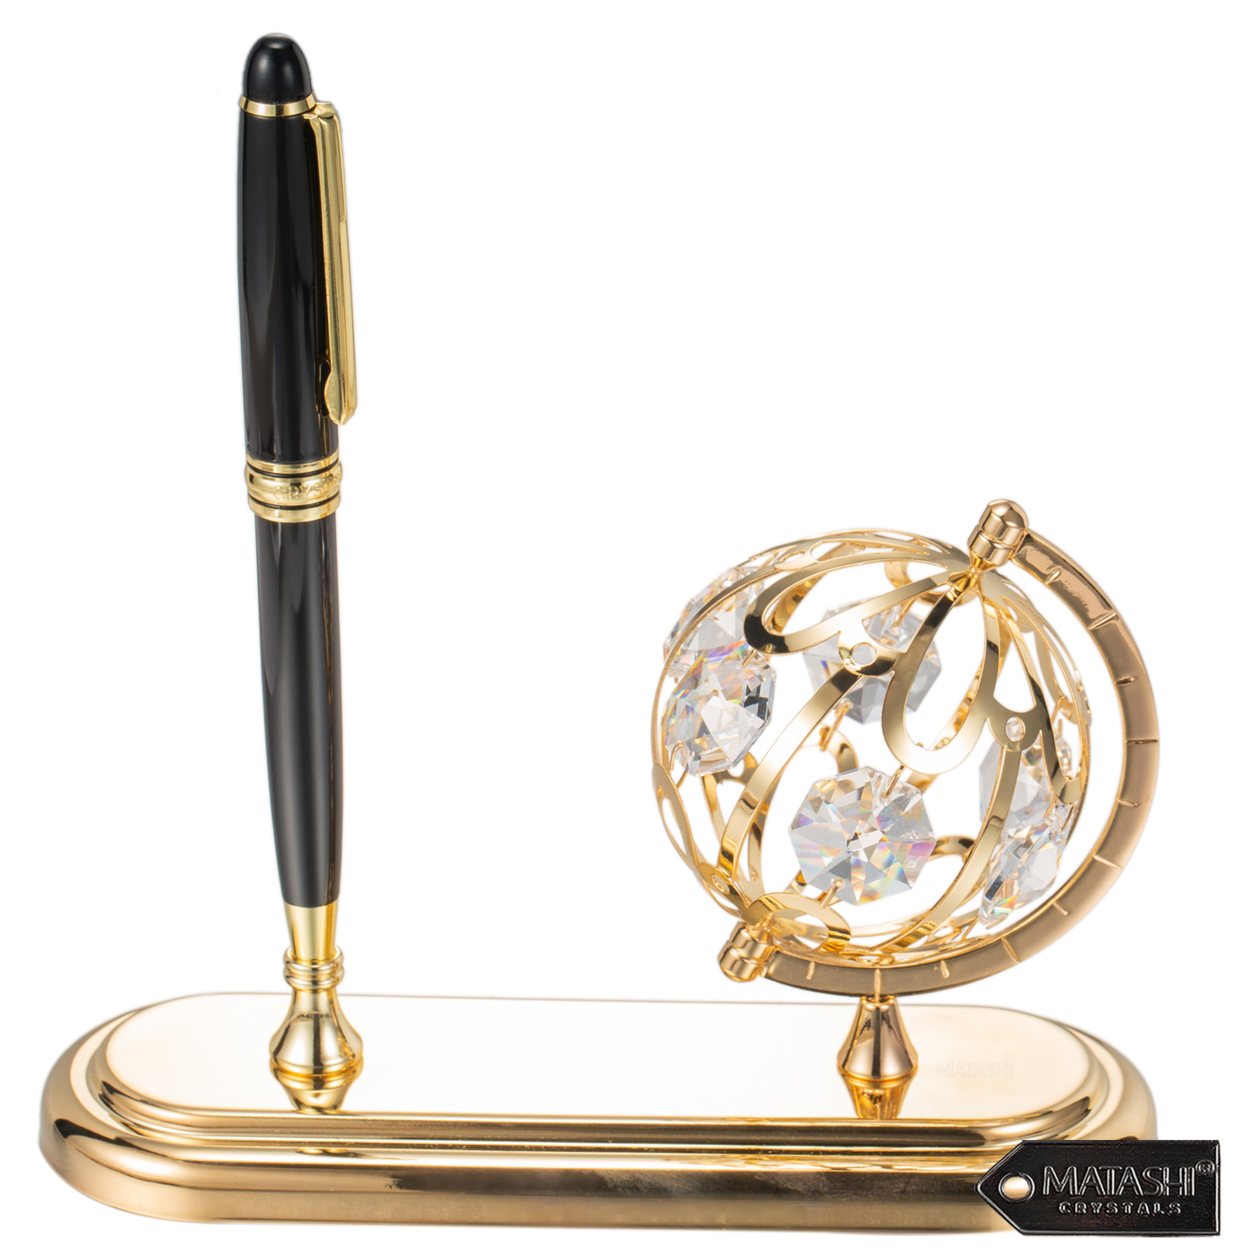 Highly Polished 24K Gold Plated Executive Desk Set With Pen And Globe Ornament By Matashi